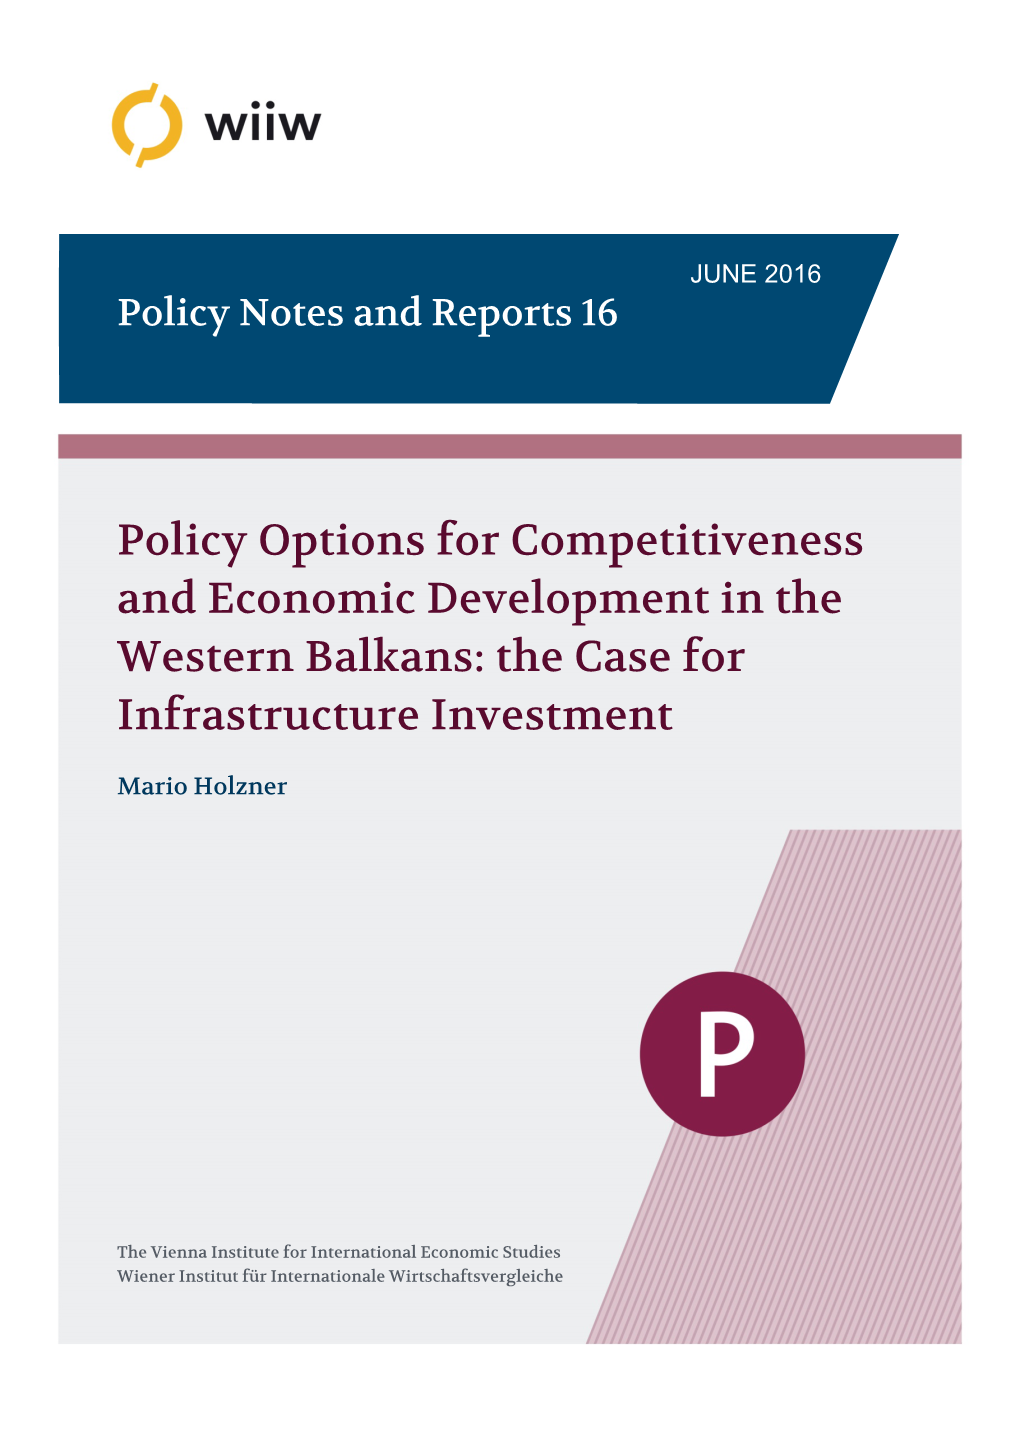 Olicy Options for Competitiveness and Economic Development in the Western Balkans: the Case for Infrastructure Investment